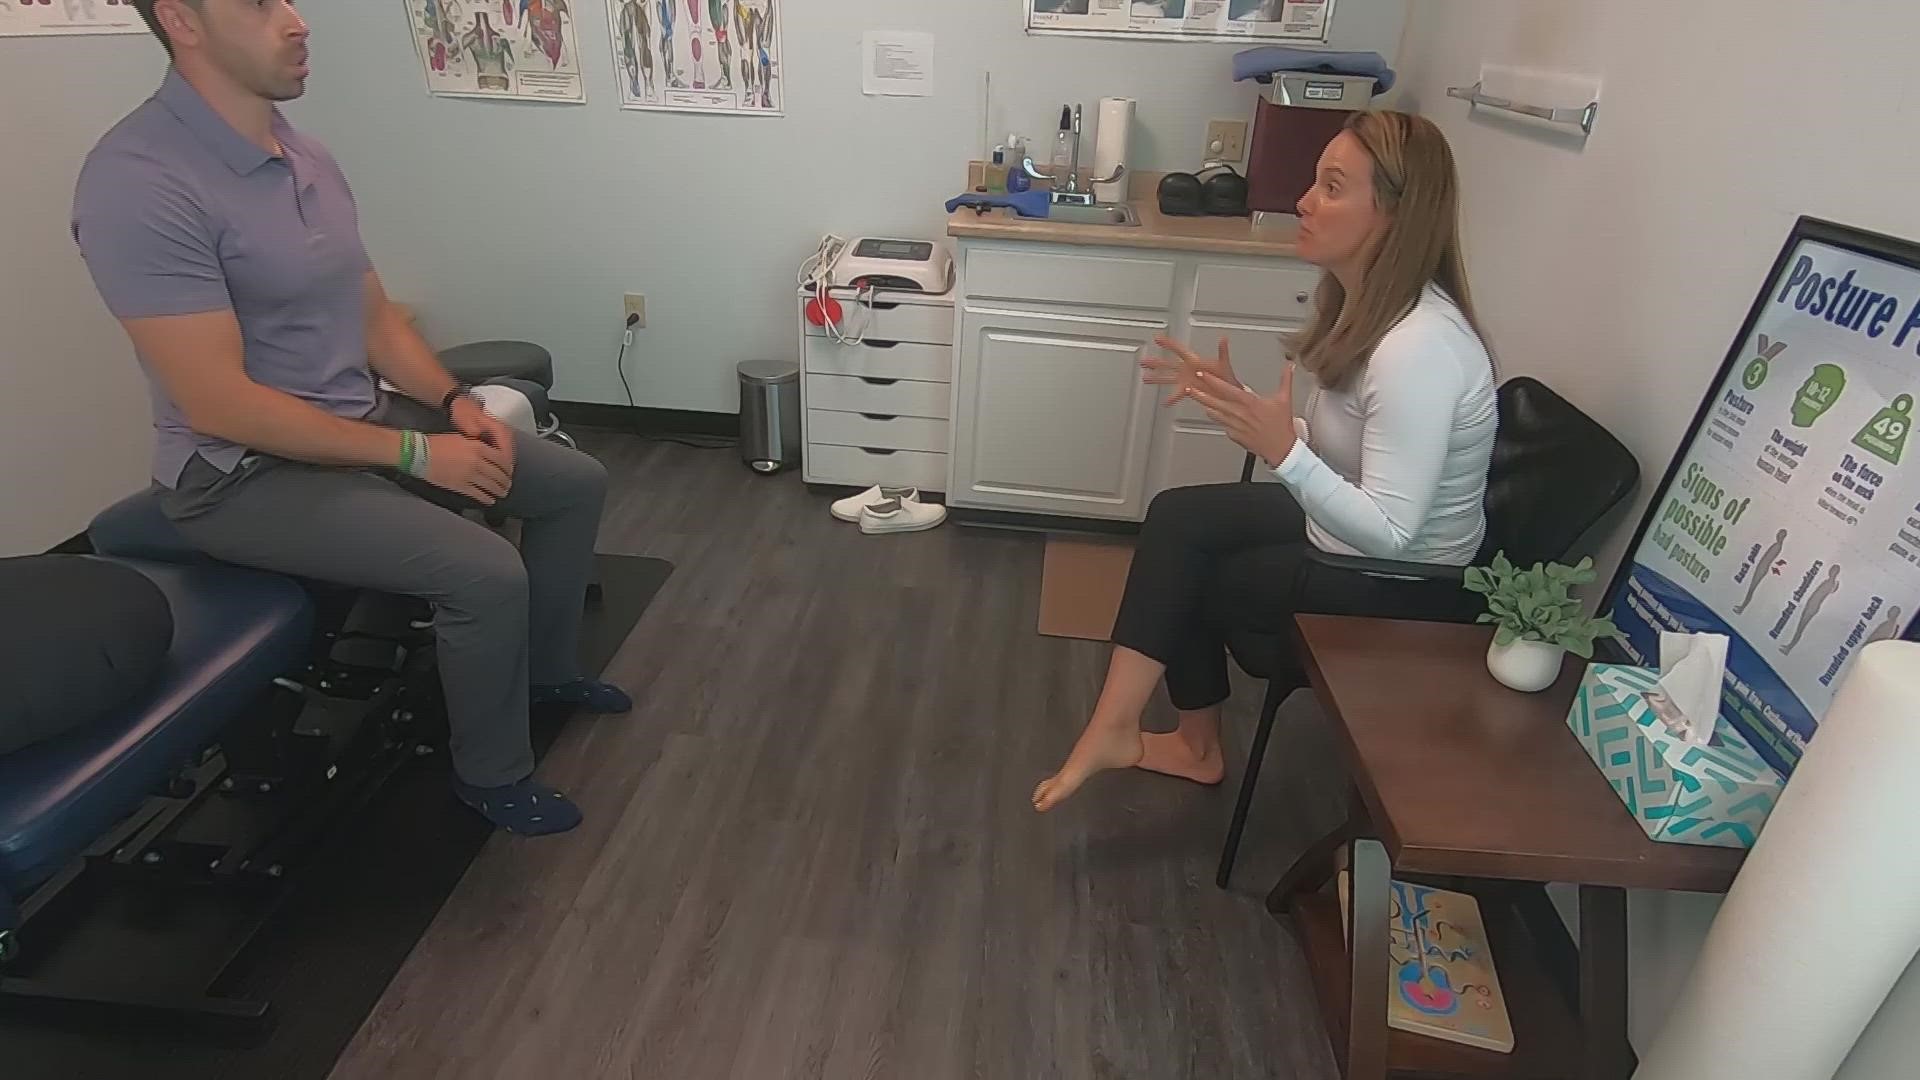 Dr. Allyson Coffin started a meditation program for moms to handle the daily stress of life and all its responsibilities while remaining calm.